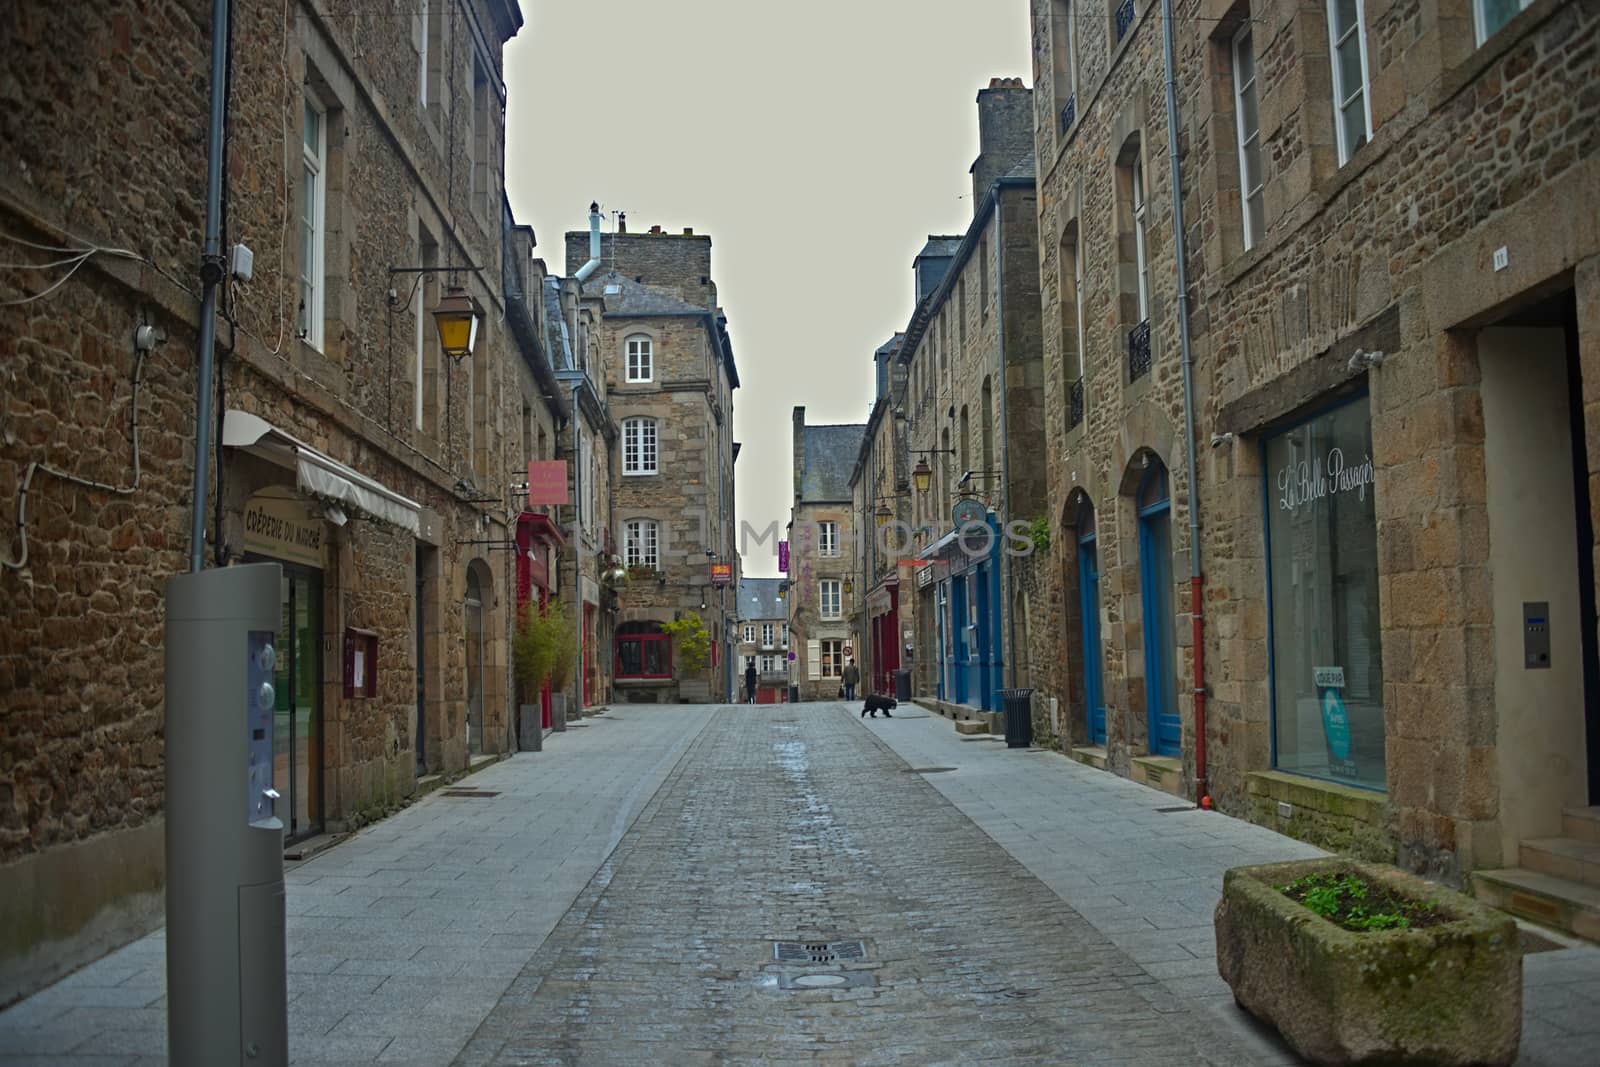 DINAN, FRANCE - April 7th 2019 - Empty street with stone building in traditional town